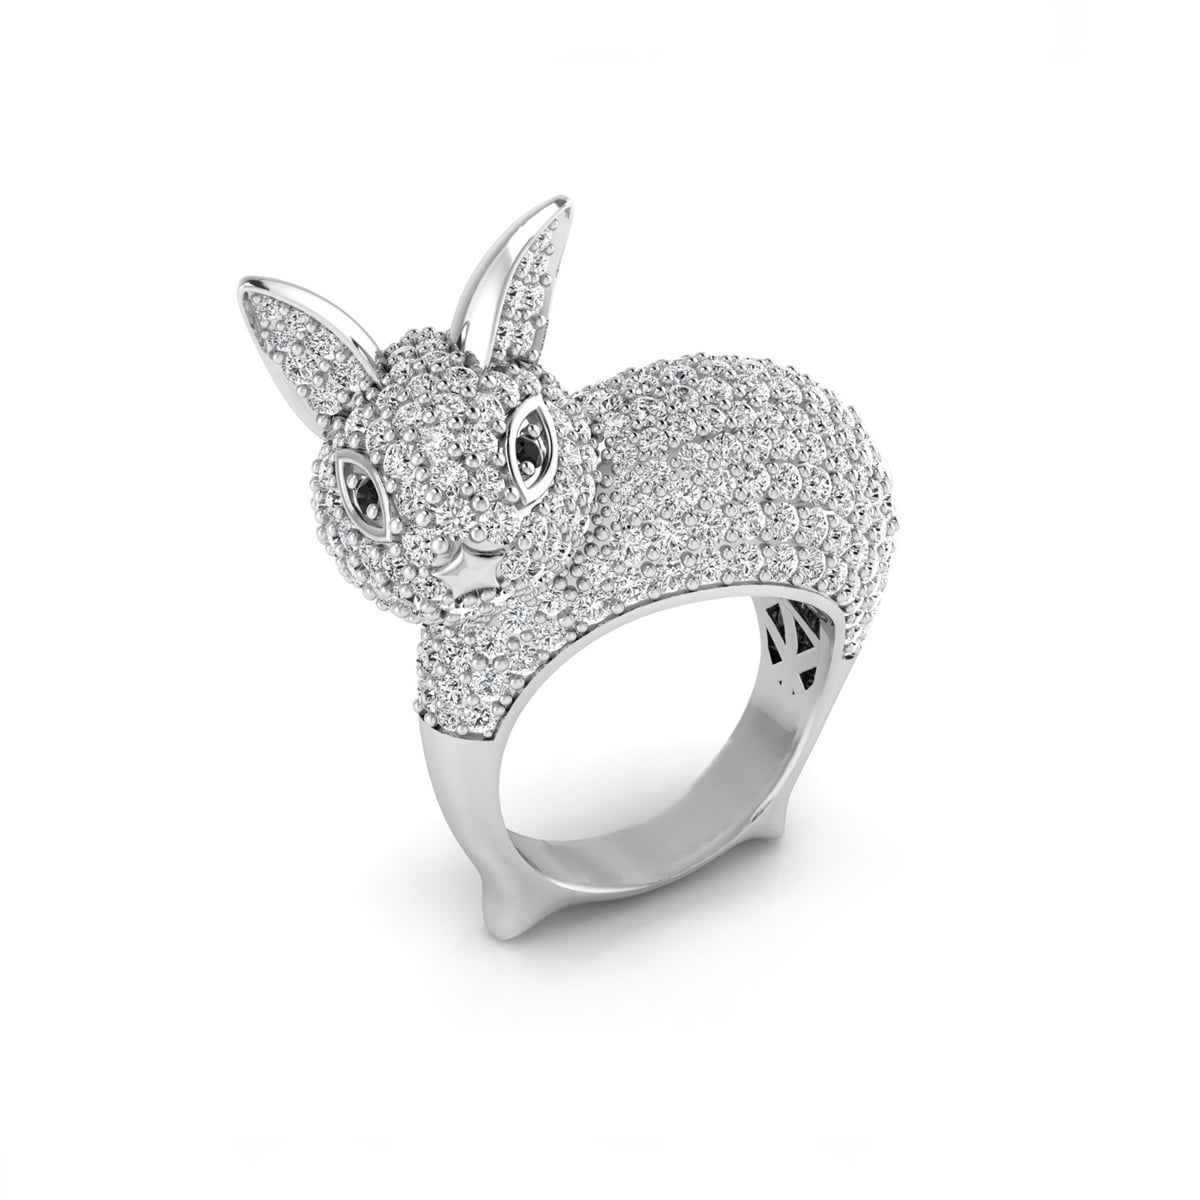 Black & White Round Cut Pave Setting CZ Stone Cocktail Party Wear Bunny Rabbit Ring For Men & Women